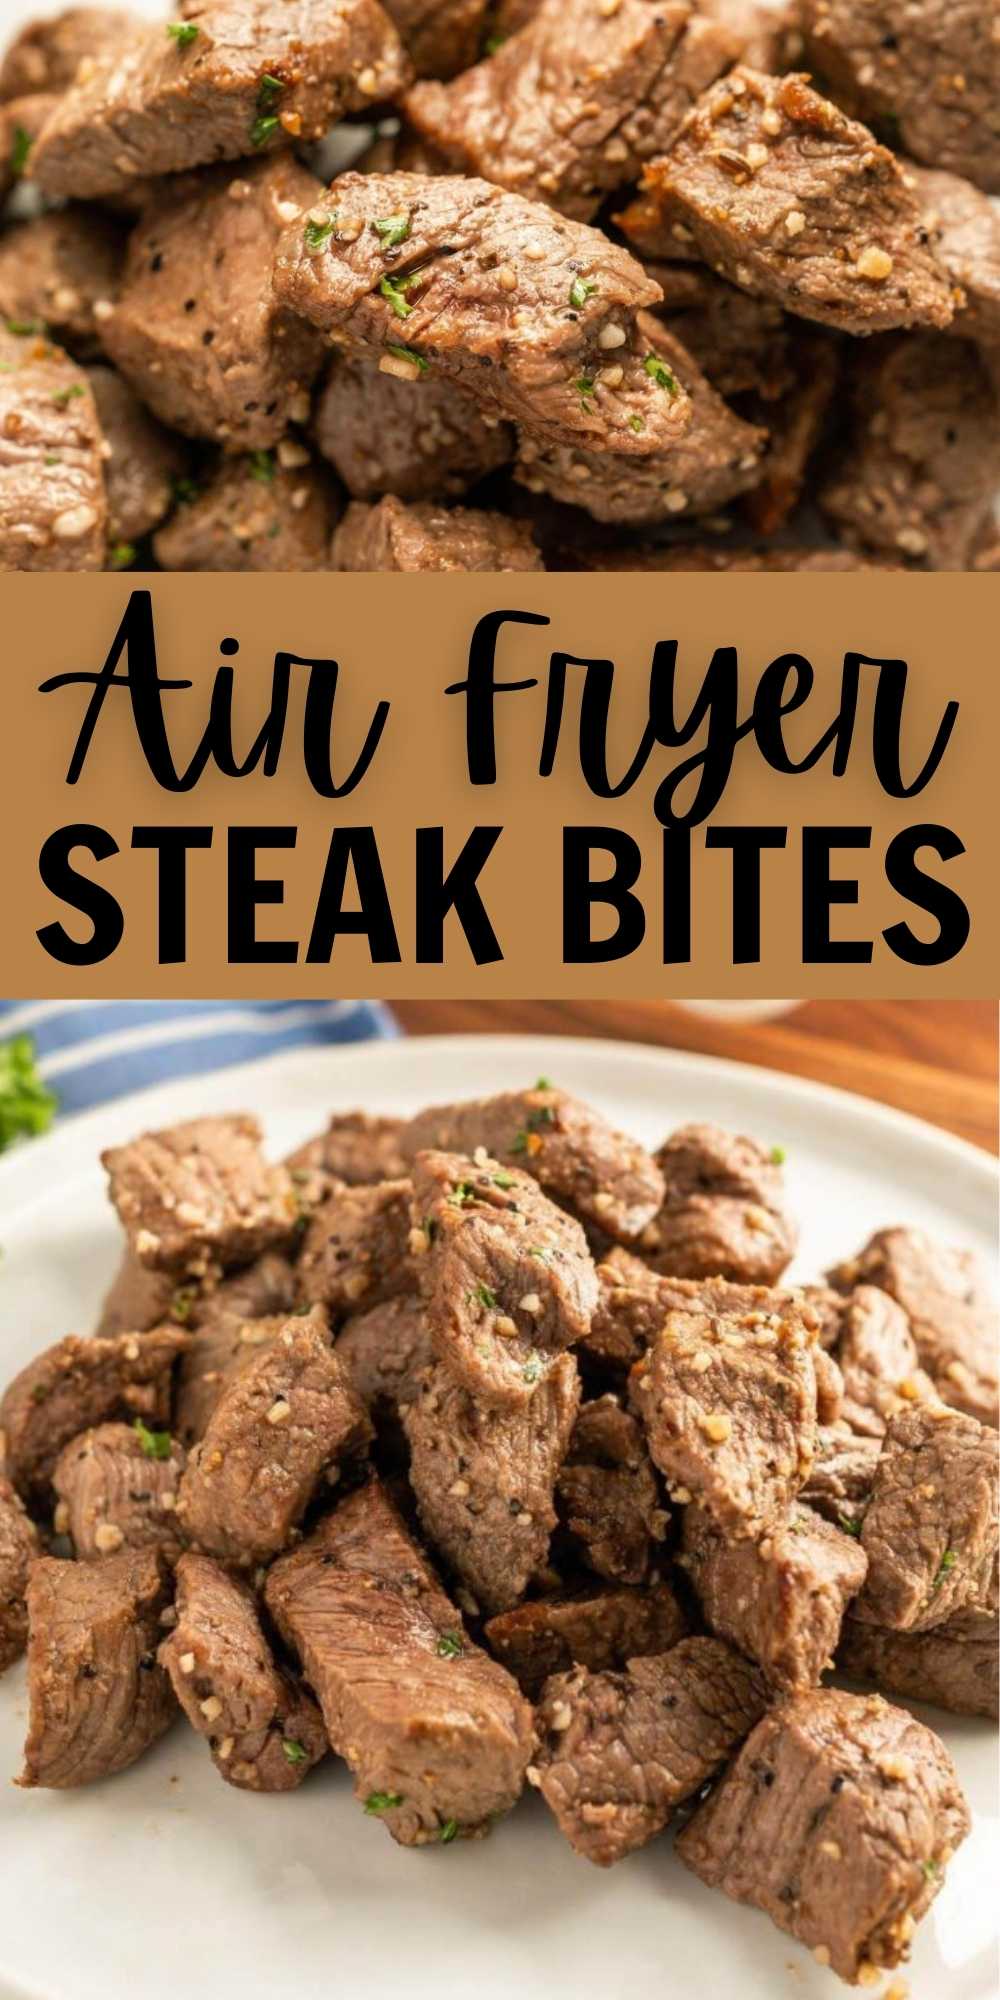 Air Fryer Steak Bites is an easy way to cook your favorite steak. The Air fryer cooks the steak perfect and the seasoning makes it flavorful. We love using our Air Fryer and these Keto Steak Bites are a family favorite. #eatingonadime #steakbites #airfryer